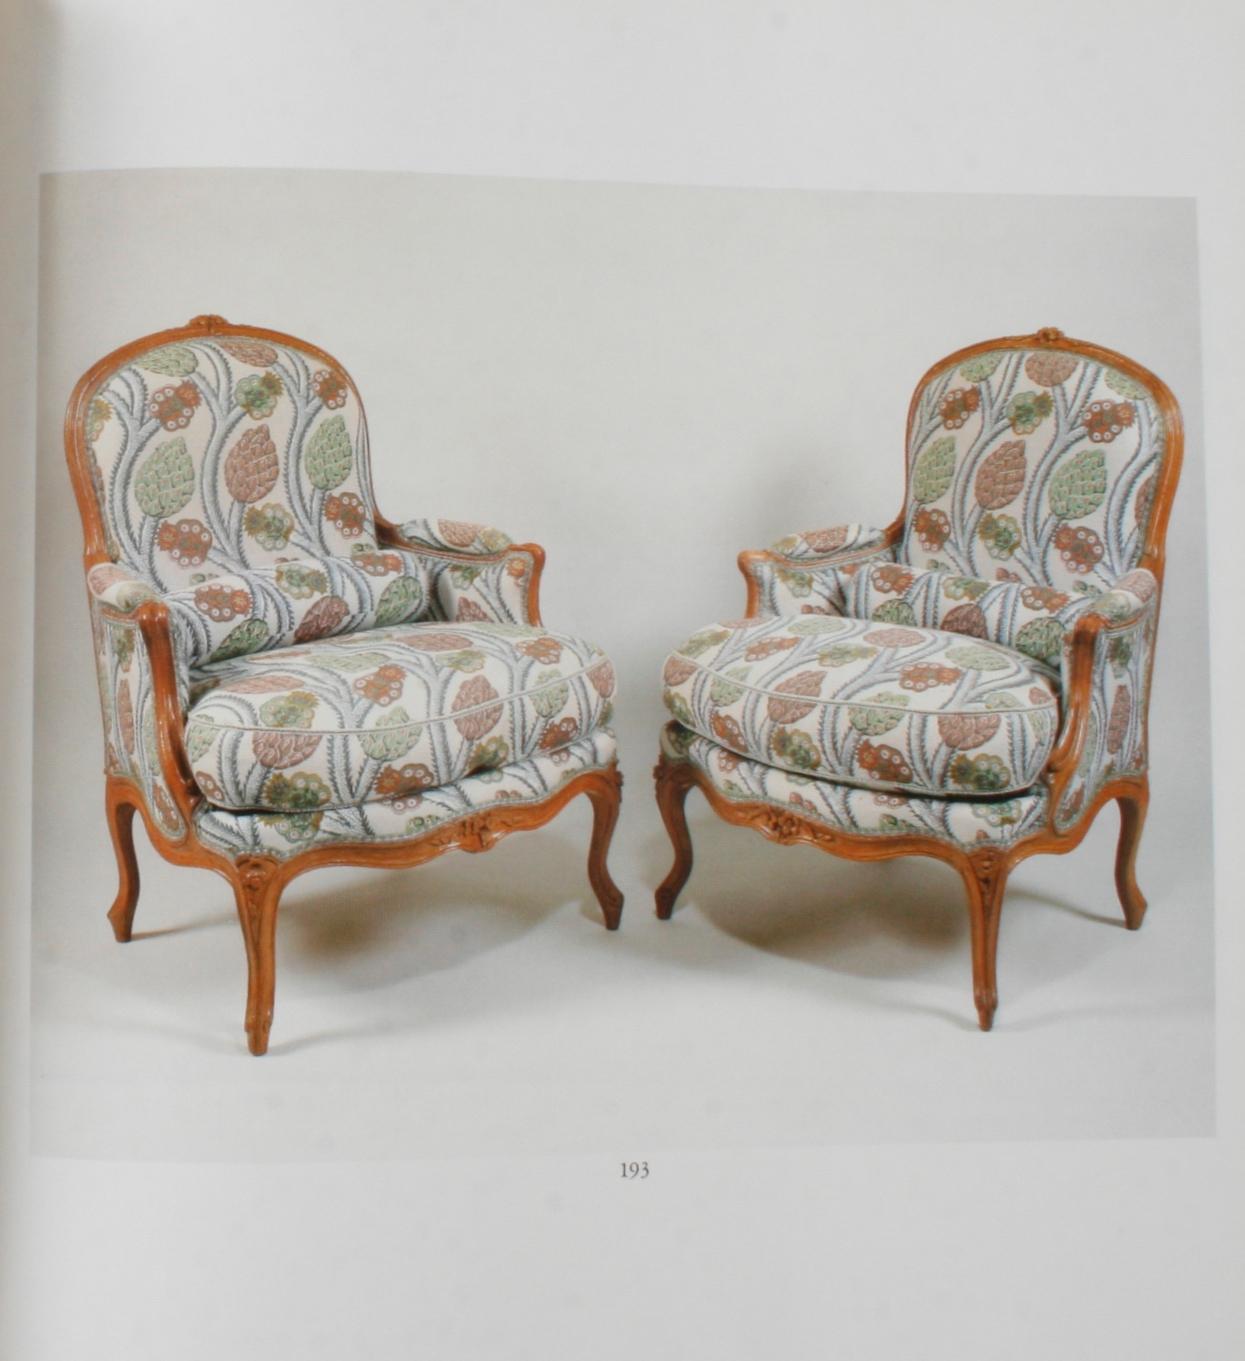 Sotheby's Auction Catalogue for The Mrs. Charles Wrightsman Palm Beach Estate 9